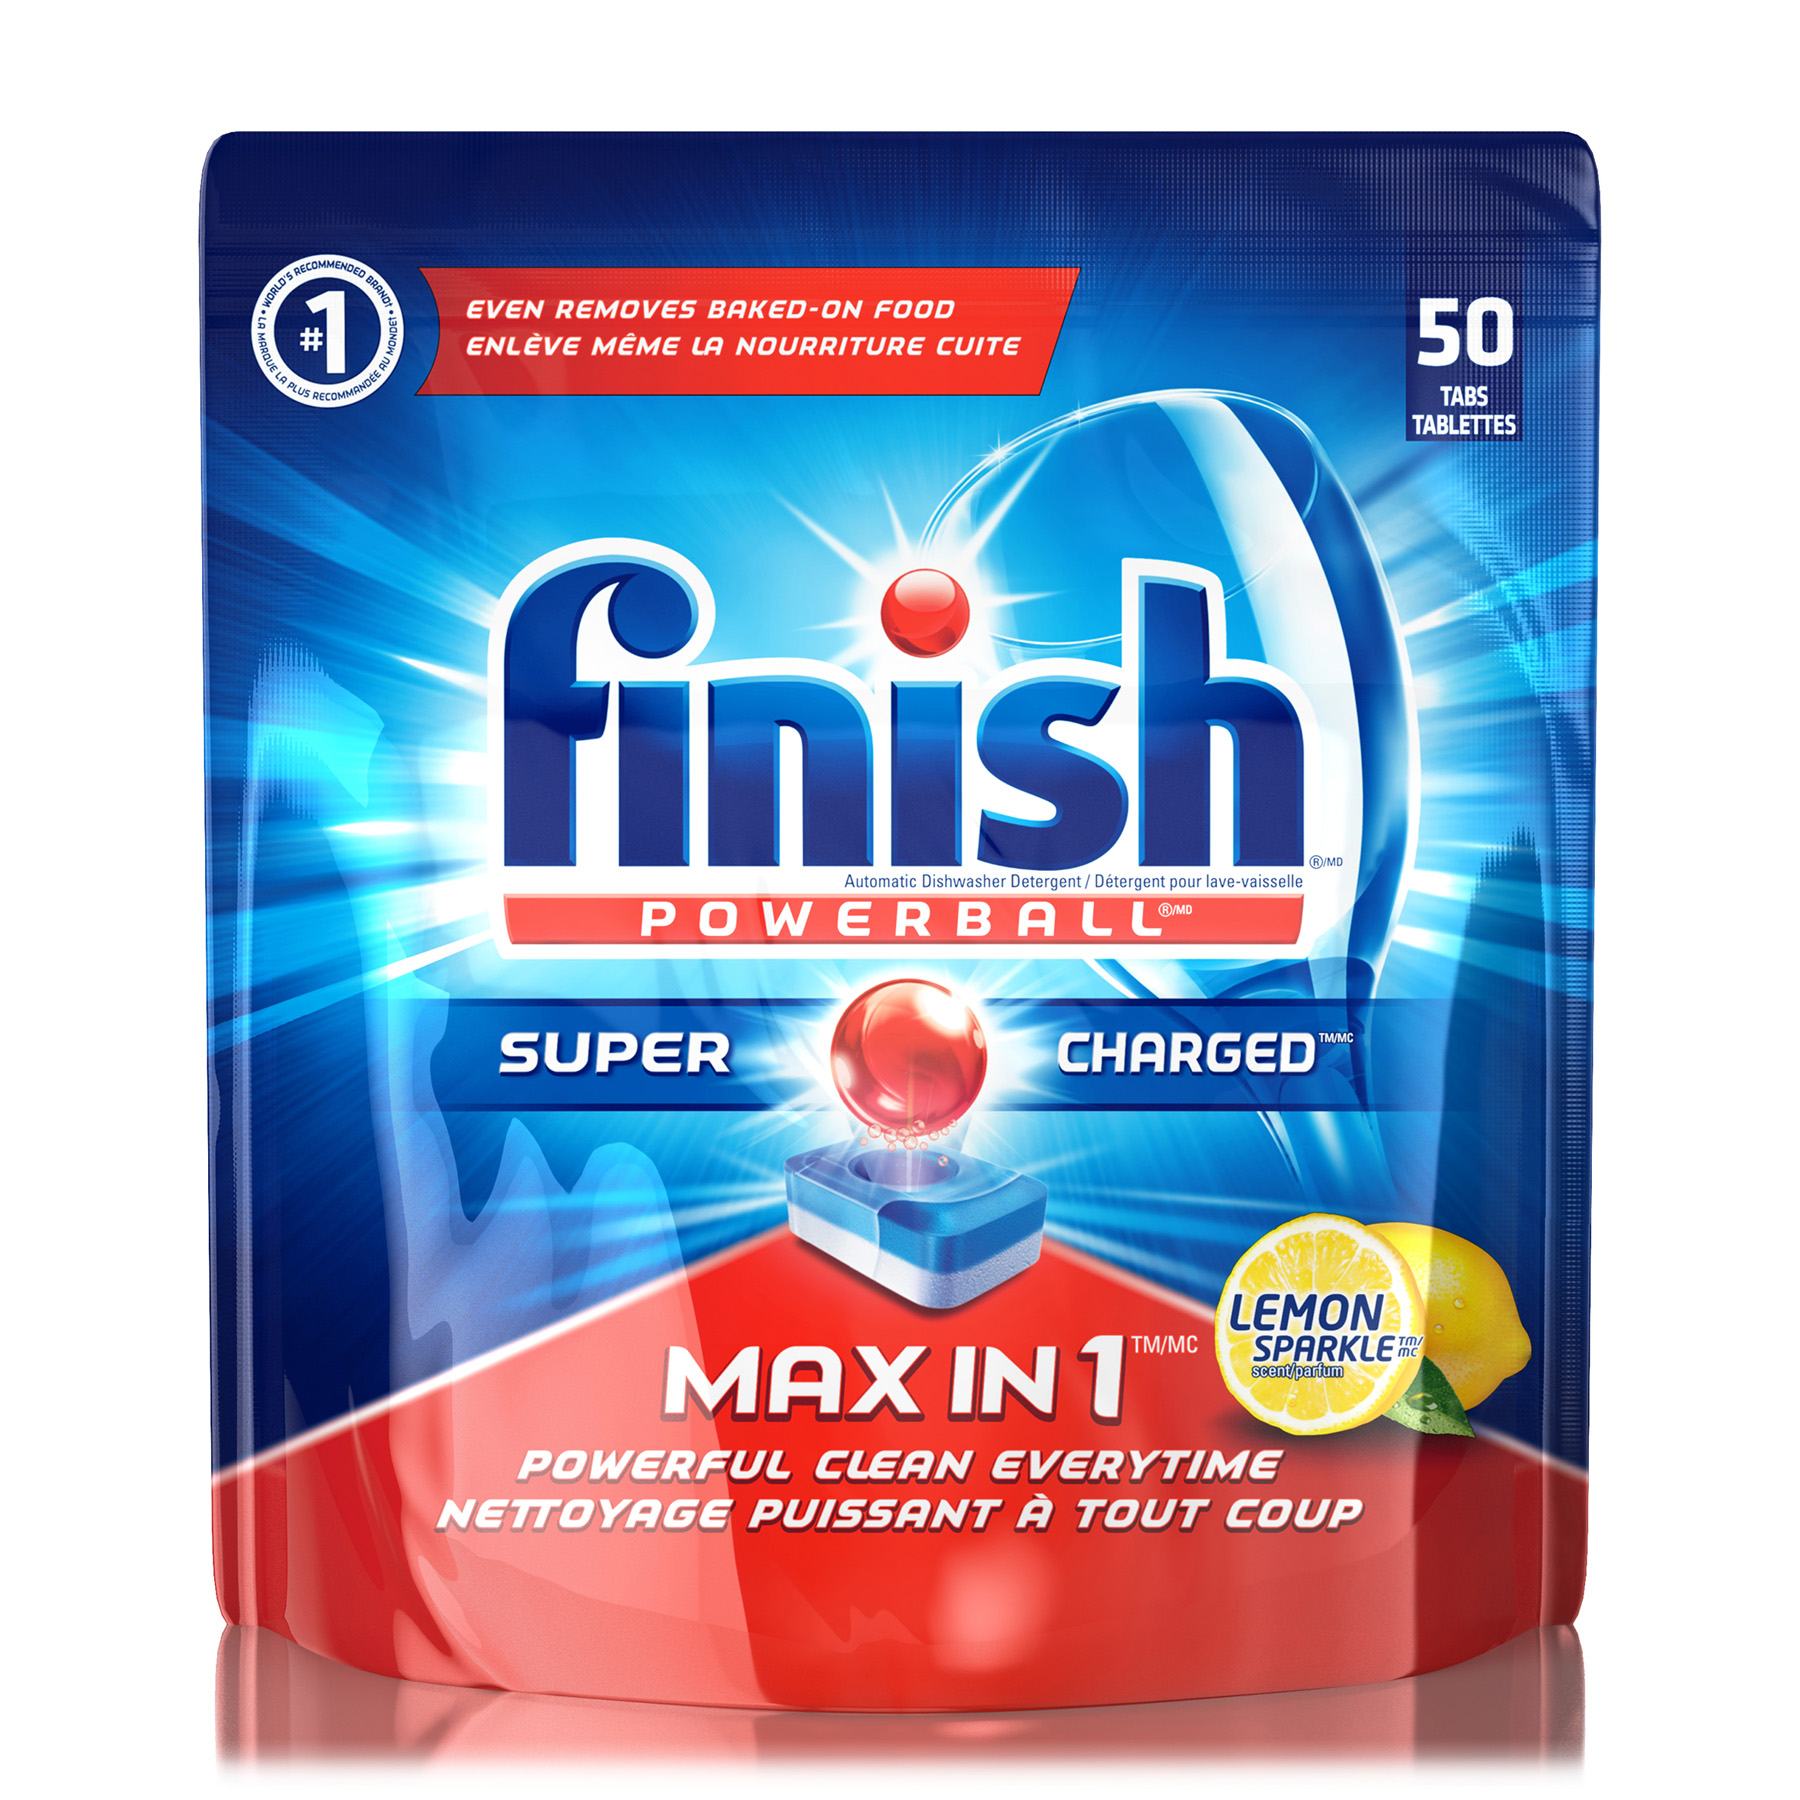 FINISH Powerball Max In 1 Lemon Sparkle Tablets Canada